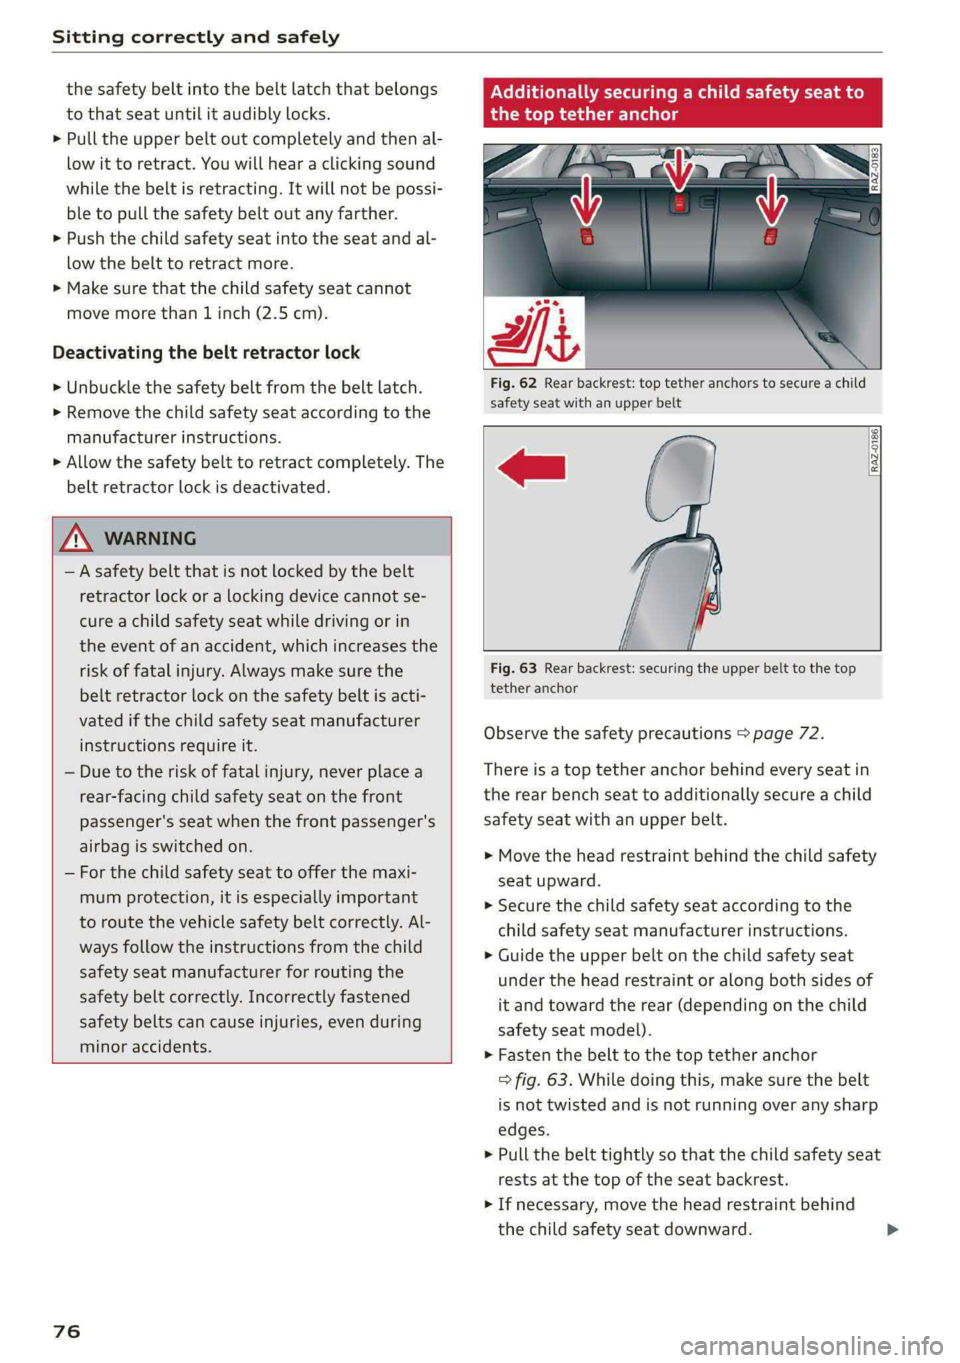 AUDI E-TRON 2021  Owners Manual Sitting correctly and safely 
  
the safety belt into the belt latch that belongs 
to that  seat until it audibly locks. 
> Pull the upper belt out completely and then al- 
low it to retract. You will